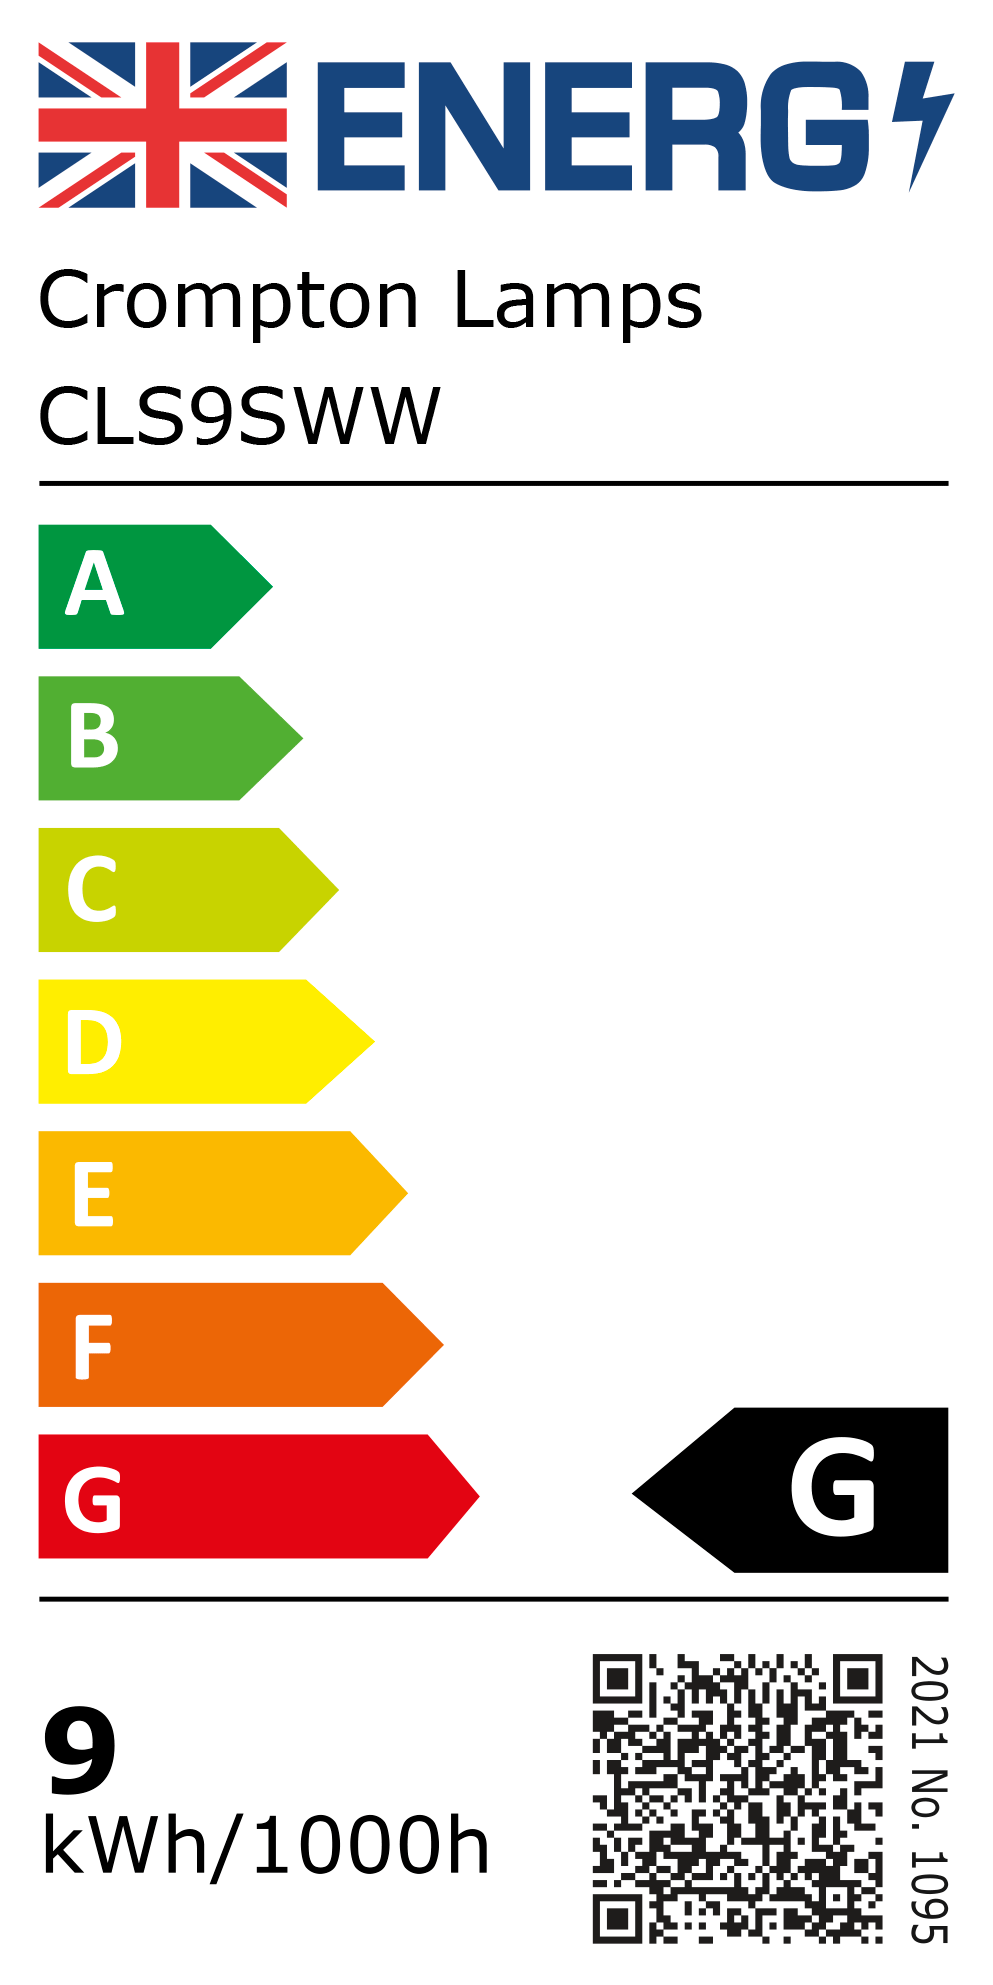 New 2021 Energy Rating Label: Stock Code CLS9SWW